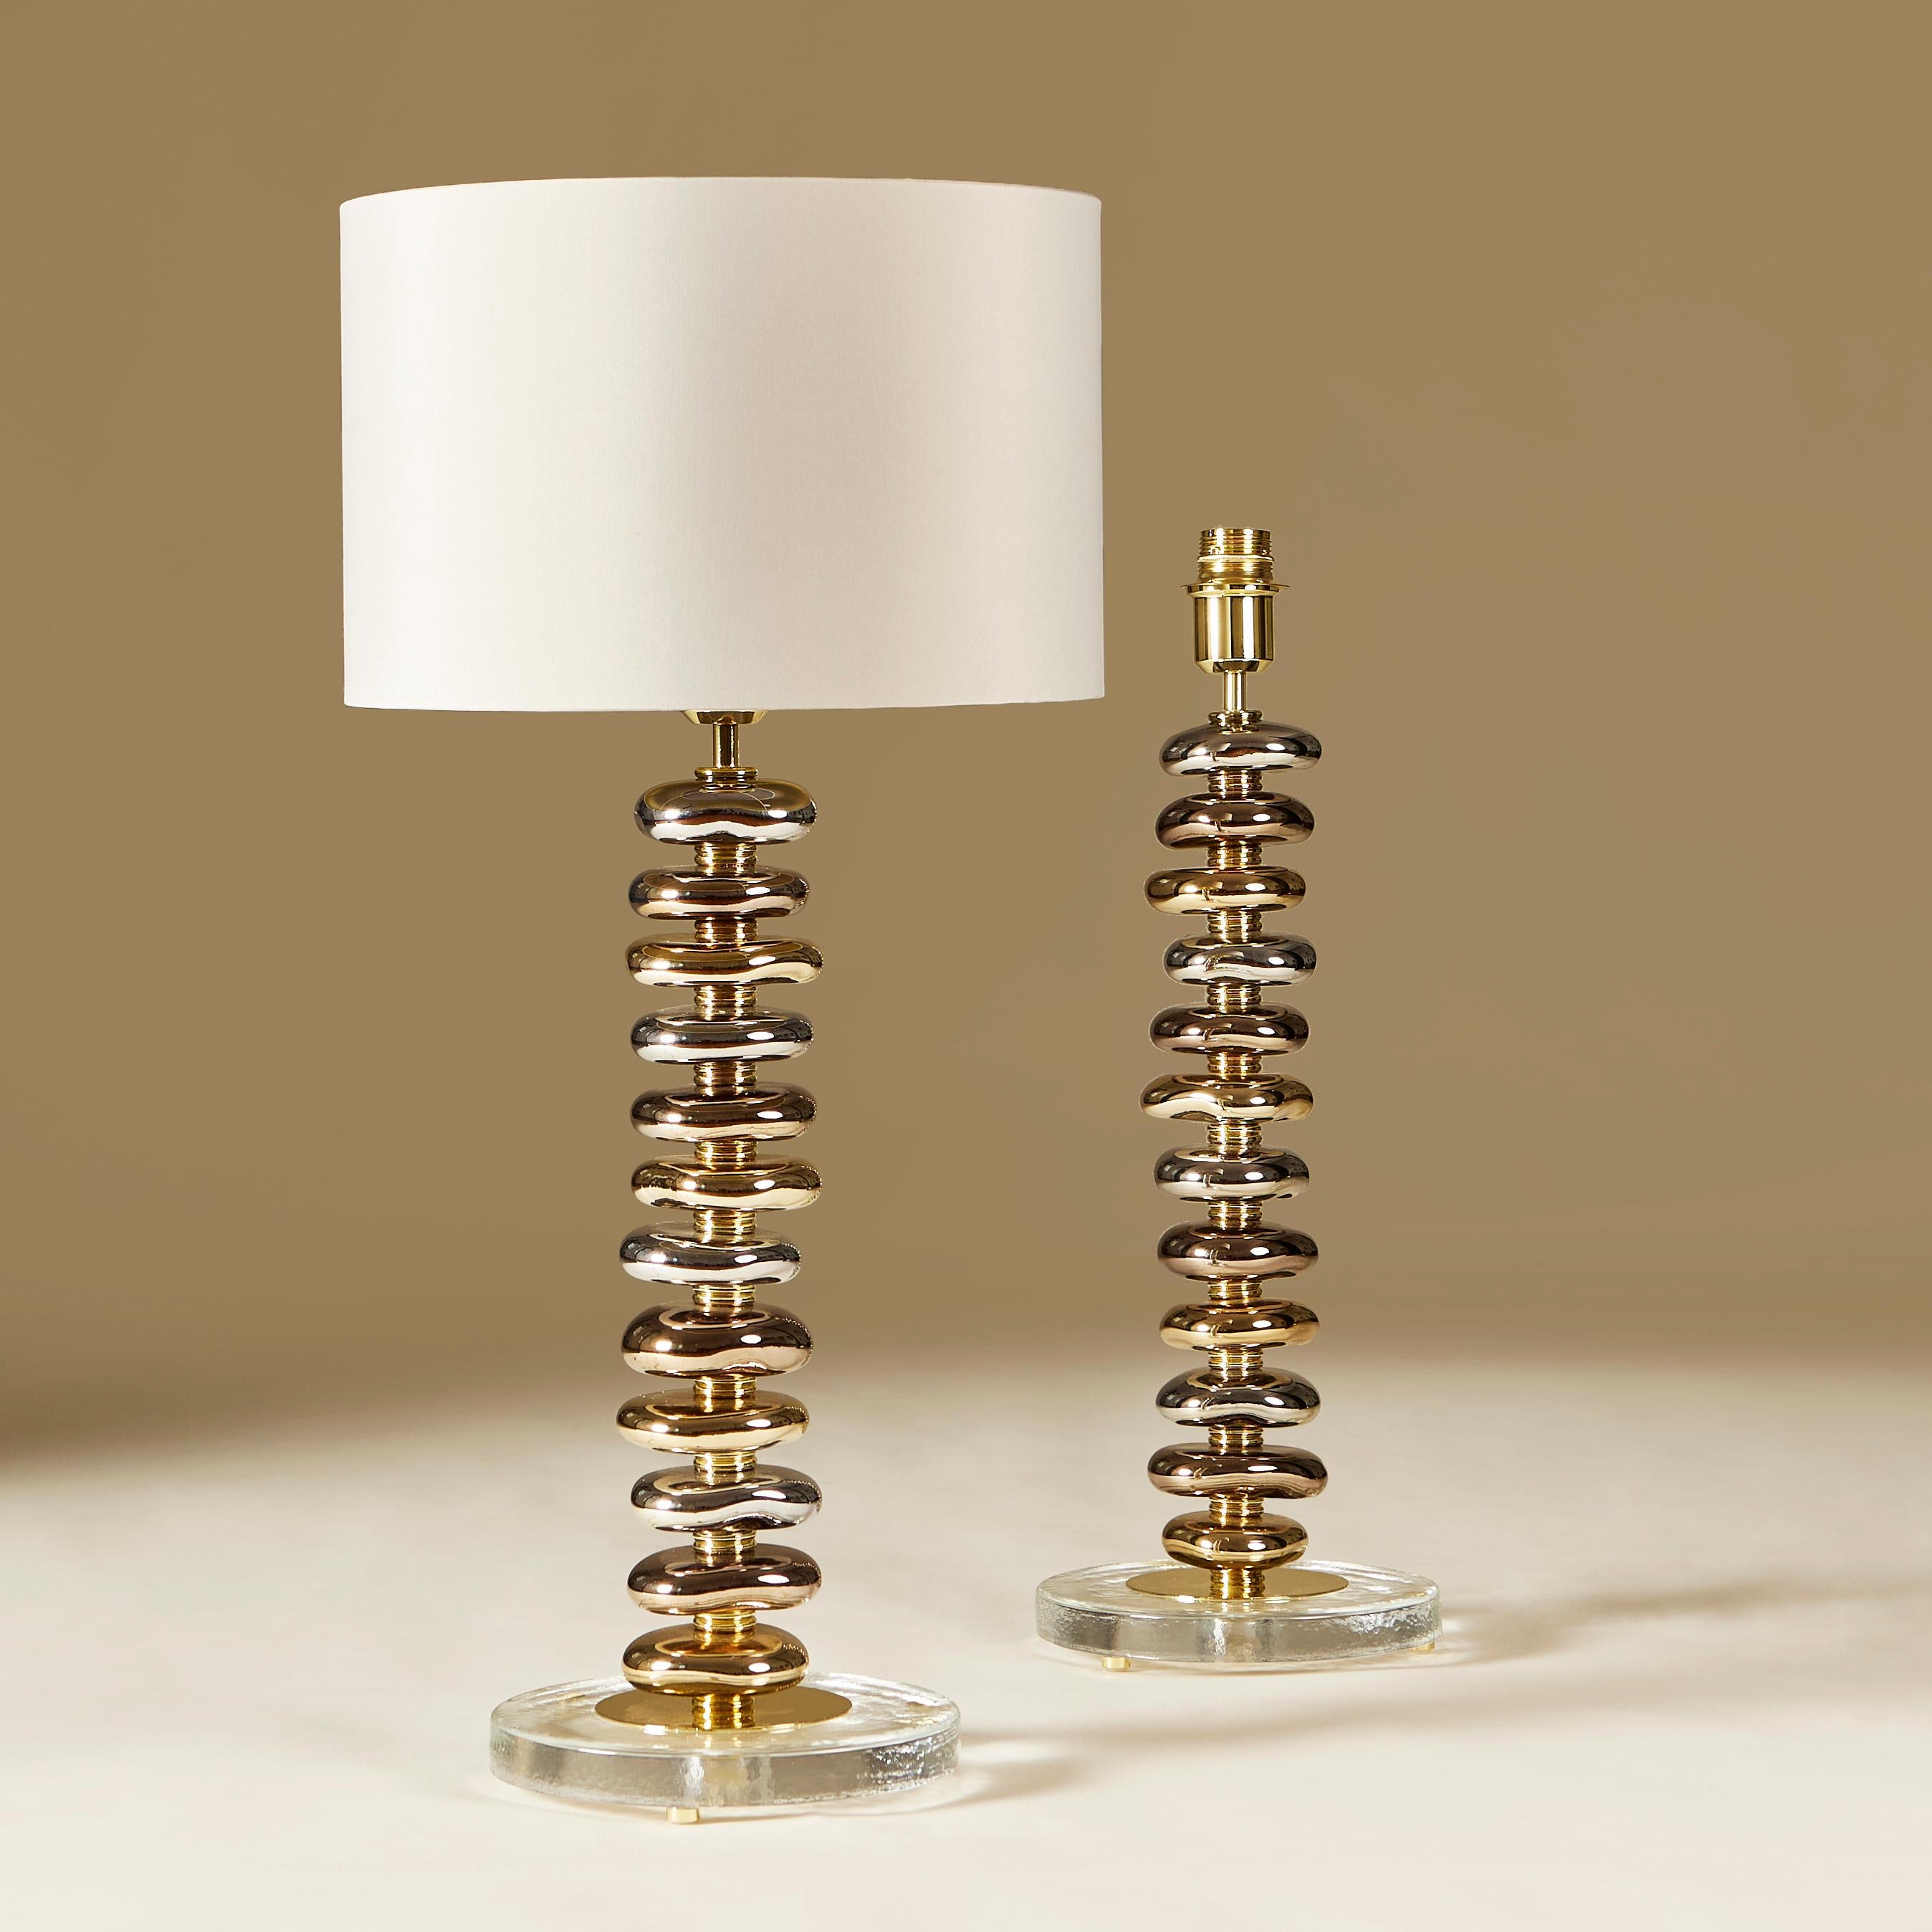 Limited edition pair of contemporary table lamps. Each lamps consists of 12 handmade smooth sculptured Murano pebbles in metallic shades of gold, silver and bronze. Each pebble is interspersed with a tiered layer of brass. Sits on circular glass